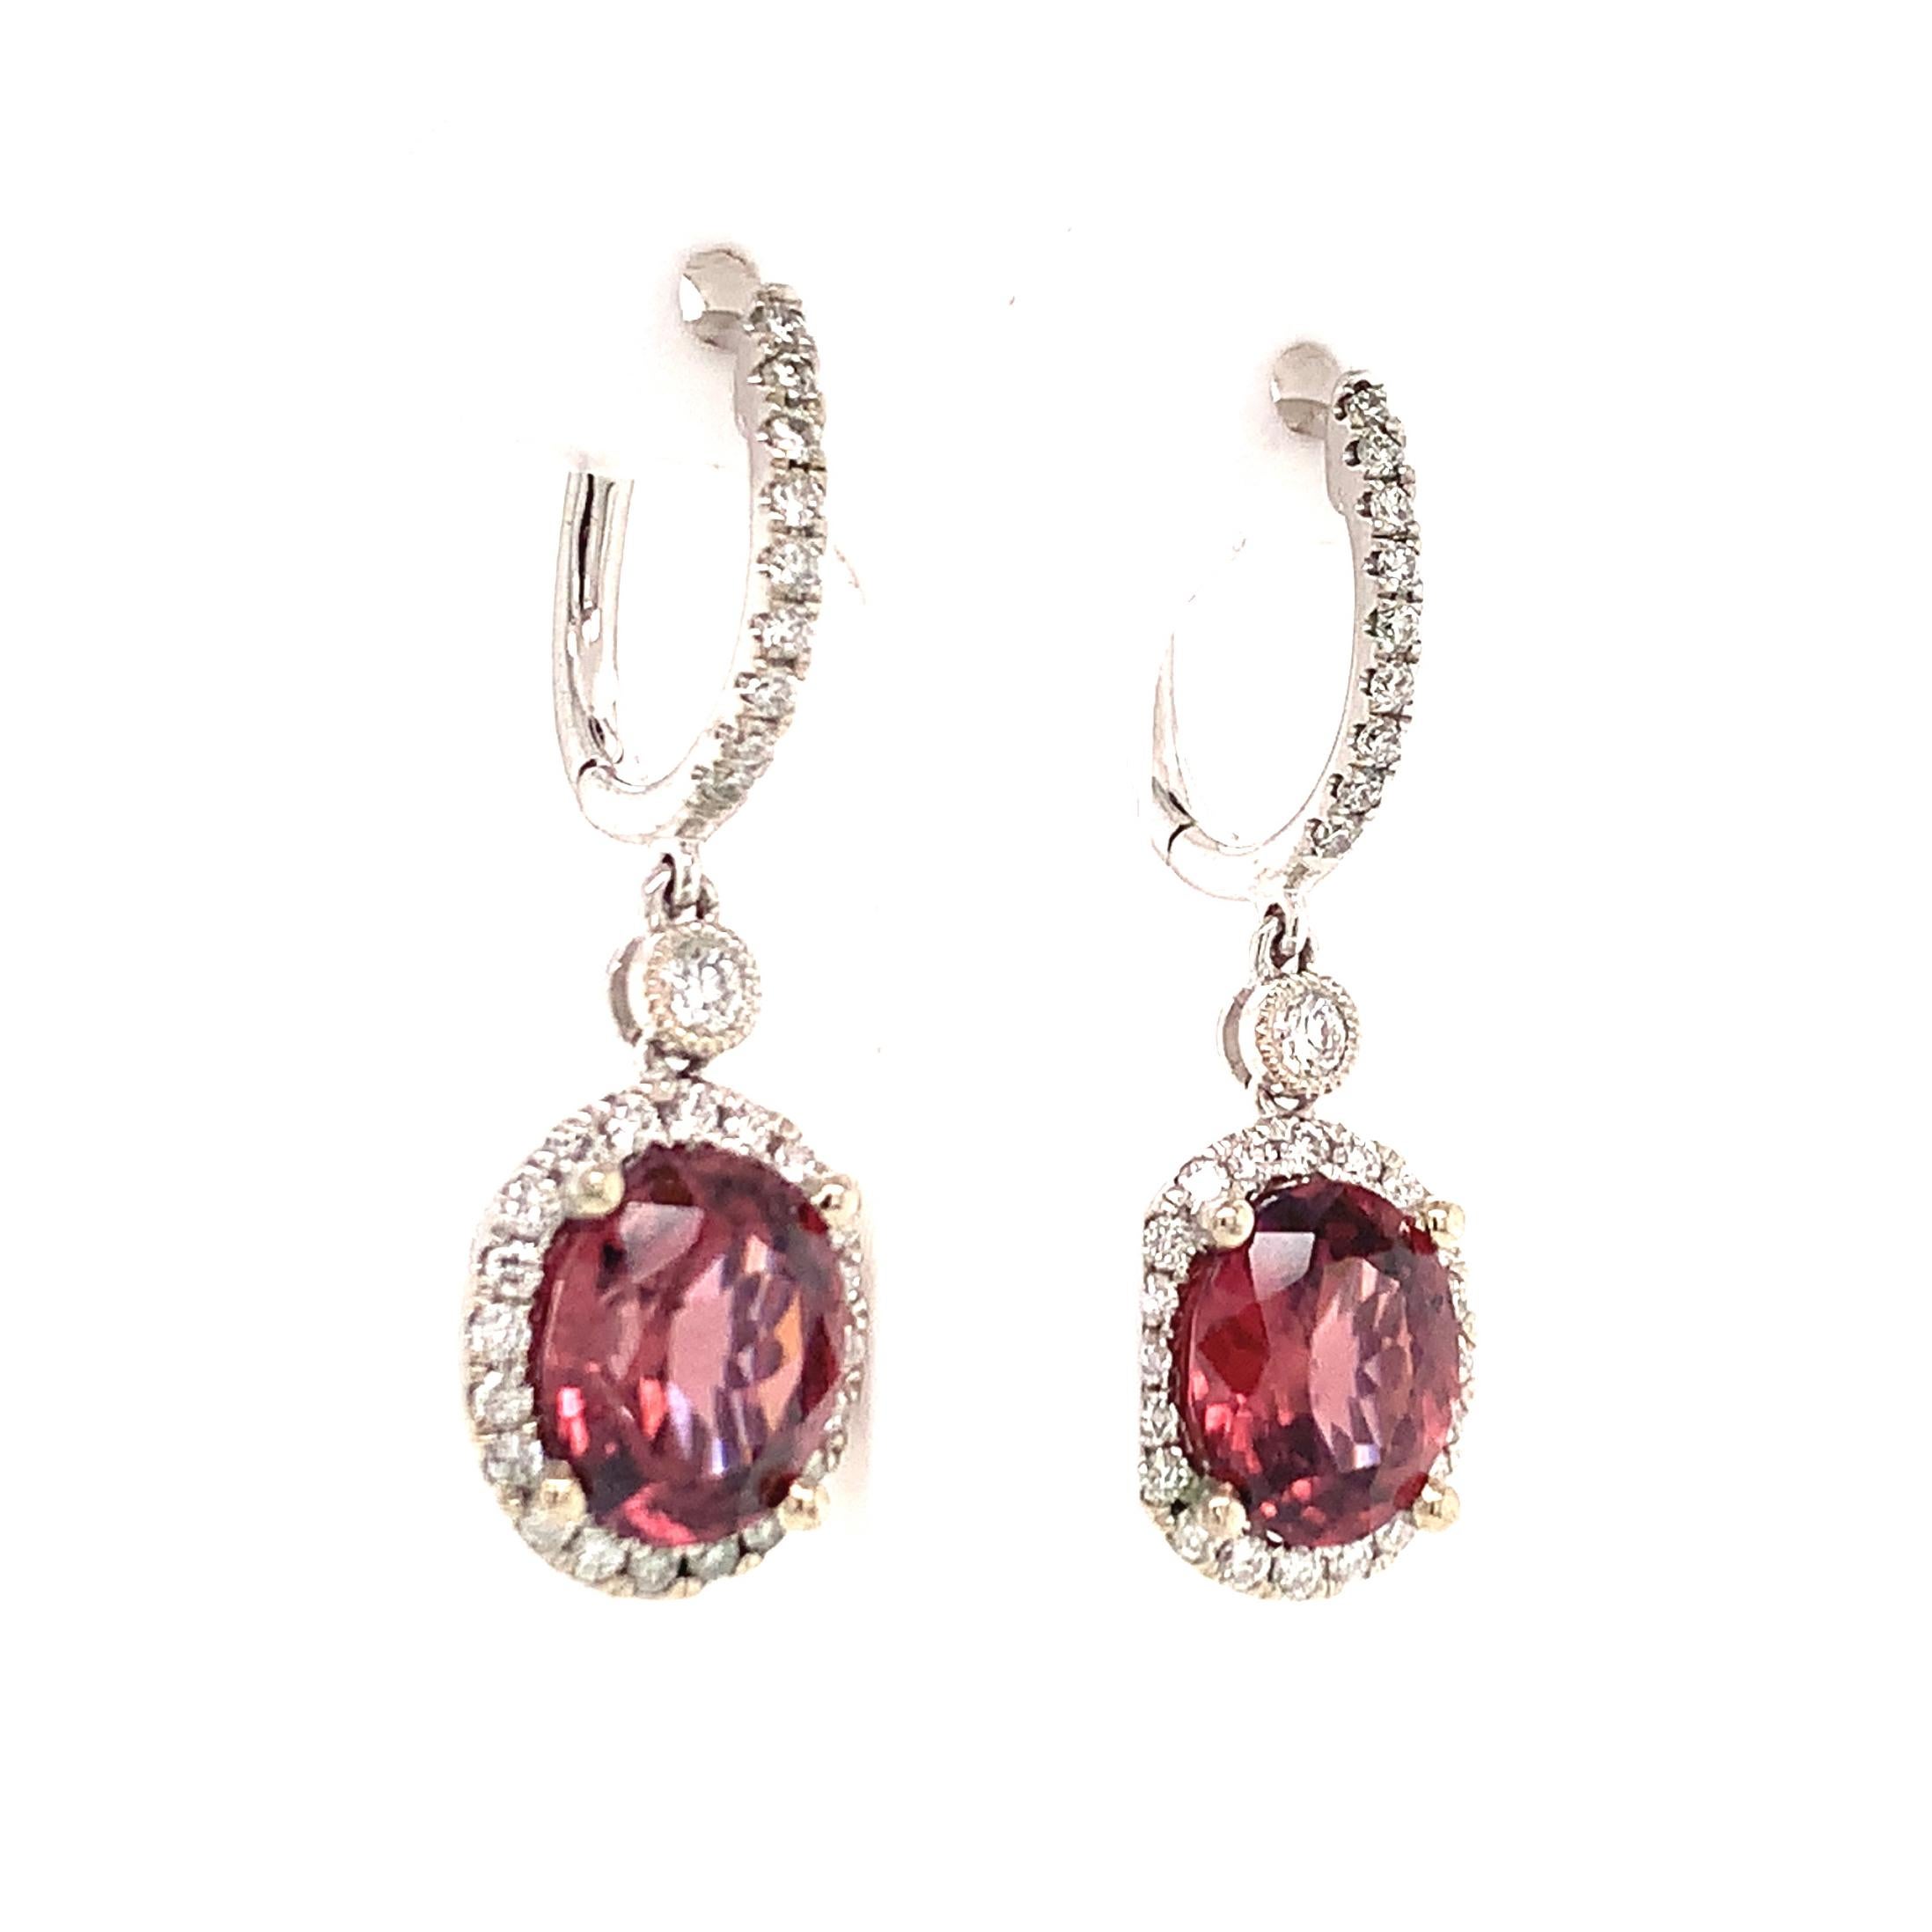 Natural Tourmaline Rubellite Diamond Earrings 18k Gold 6.62 TCW Certified For Sale 7